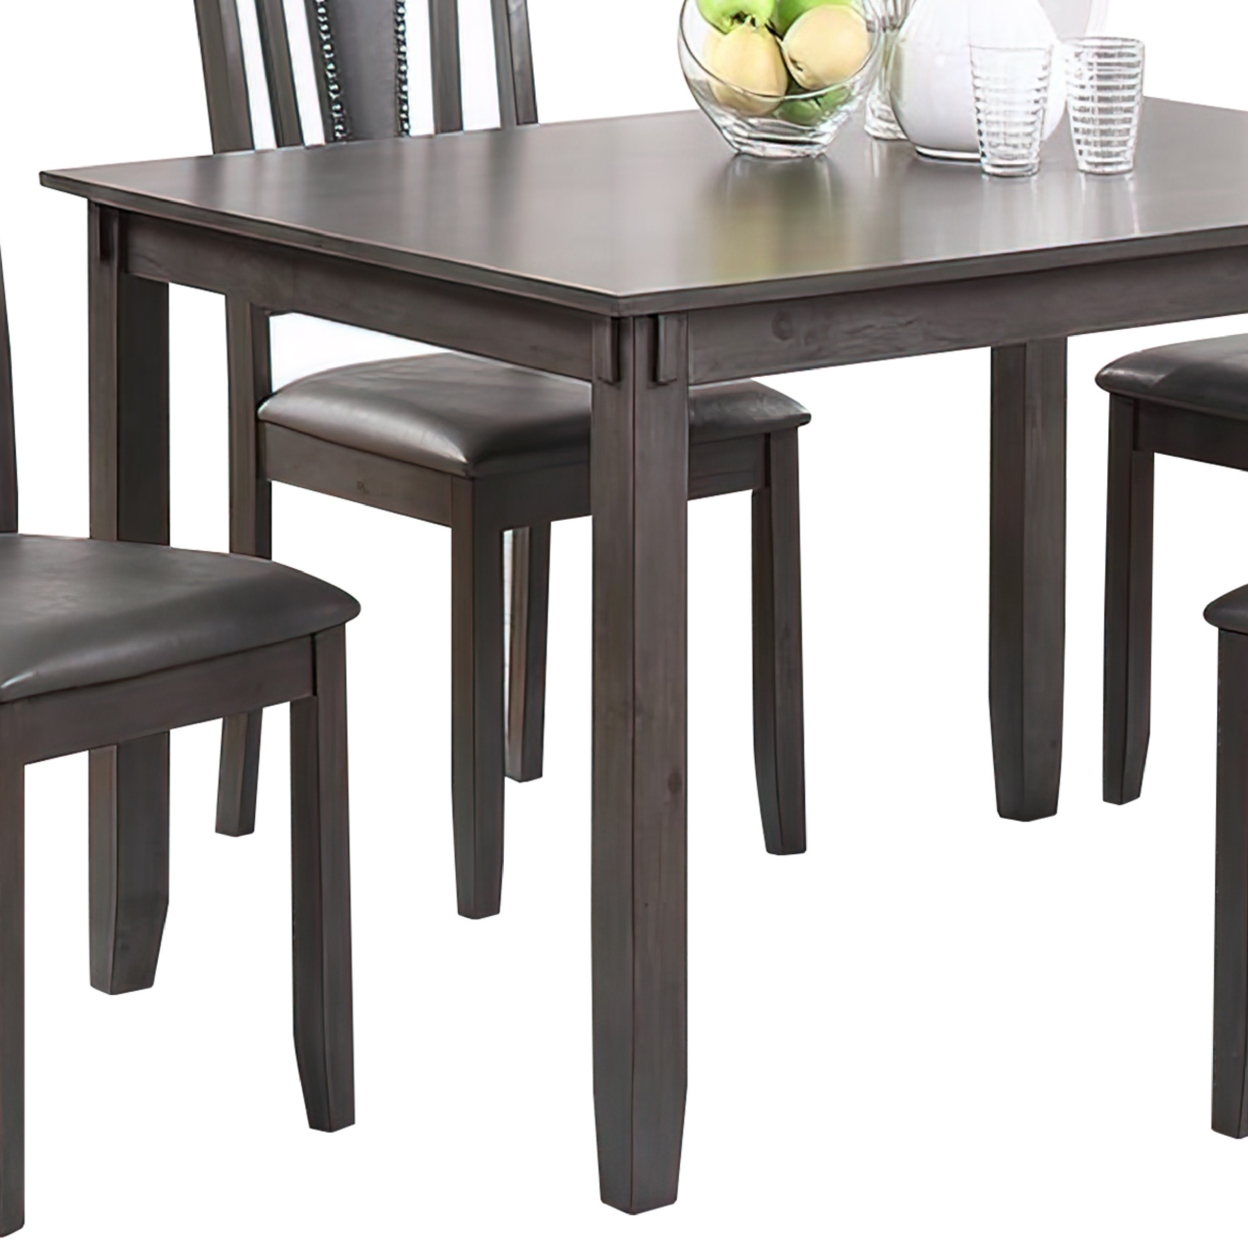 Modern 5 Piece Dining Set With Table, 4 Chairs, Cushioned, Gray And Brown- Saltoro Sherpi